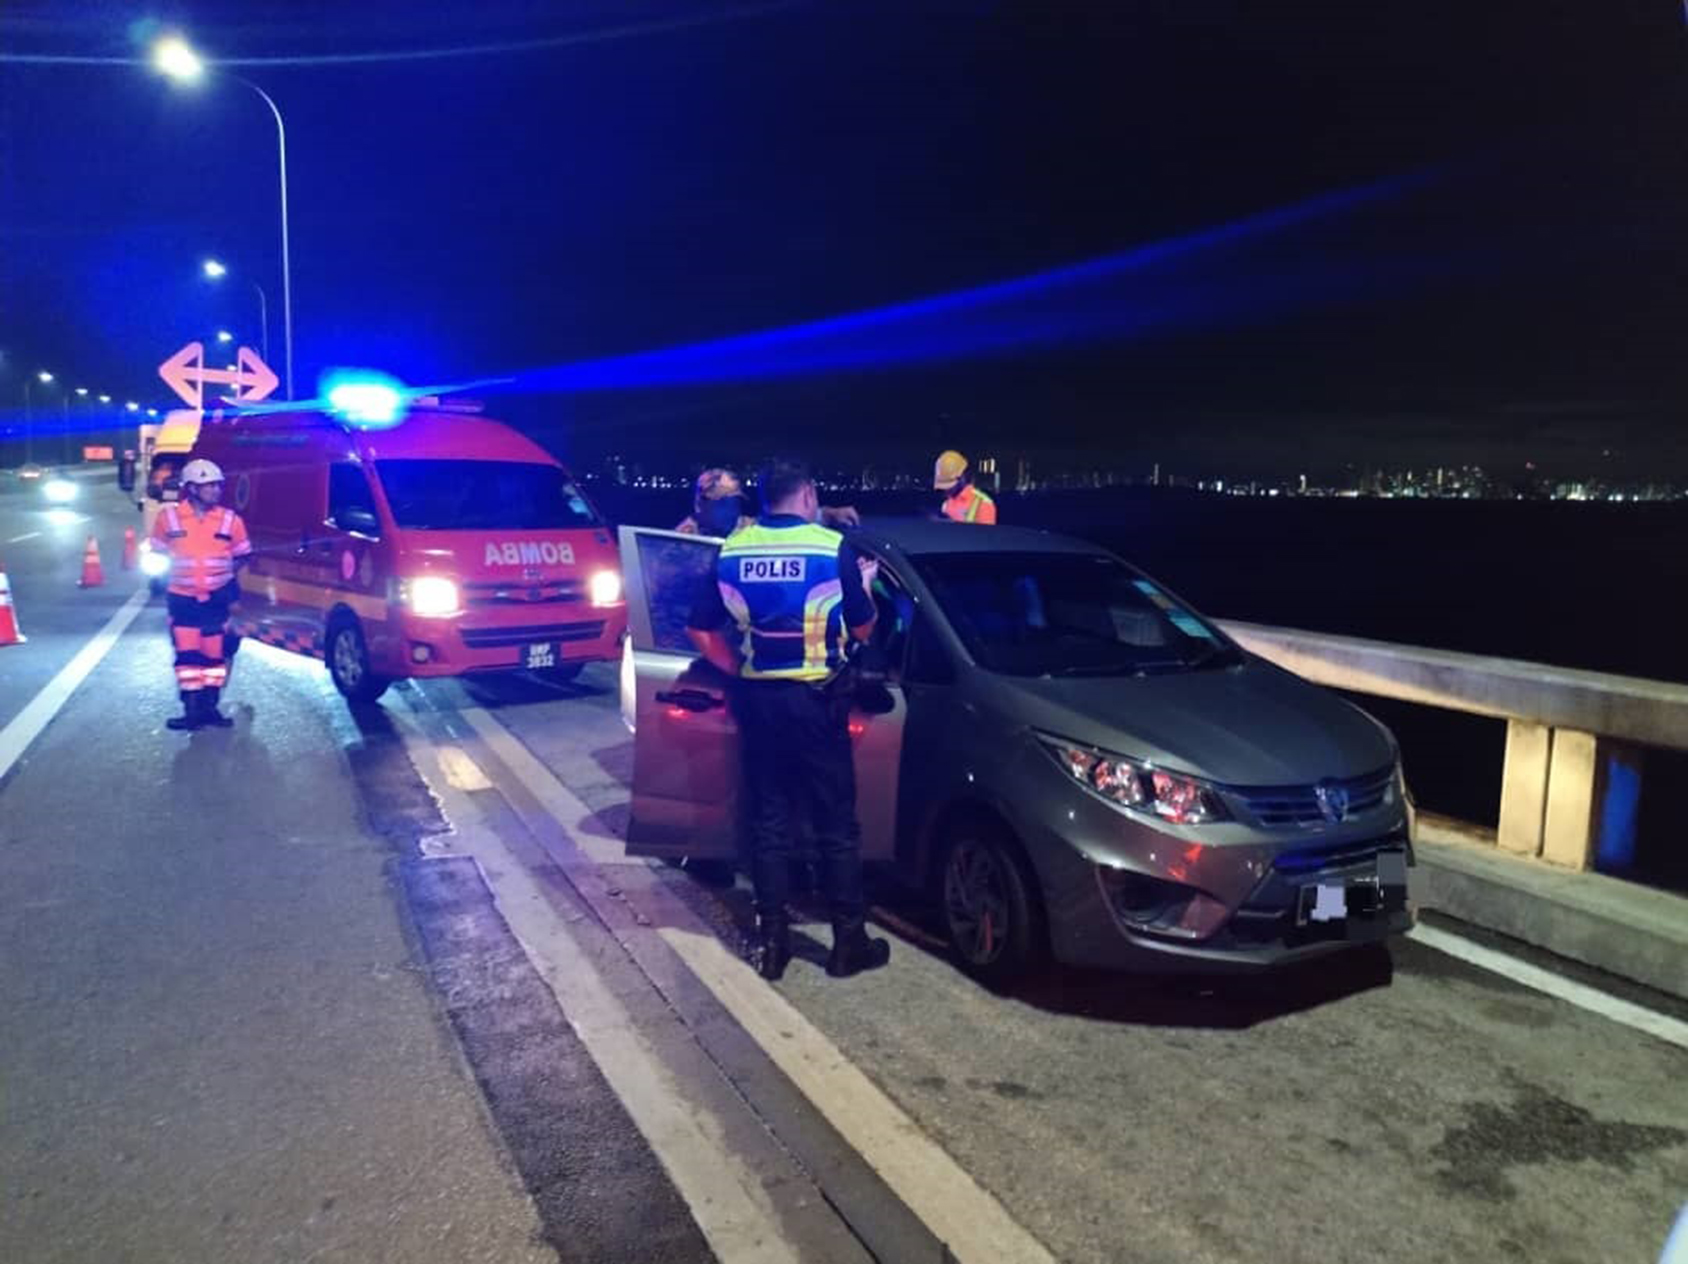 60yo m'sian woman allegedly jumps off penang bridge, authorities working to locate her